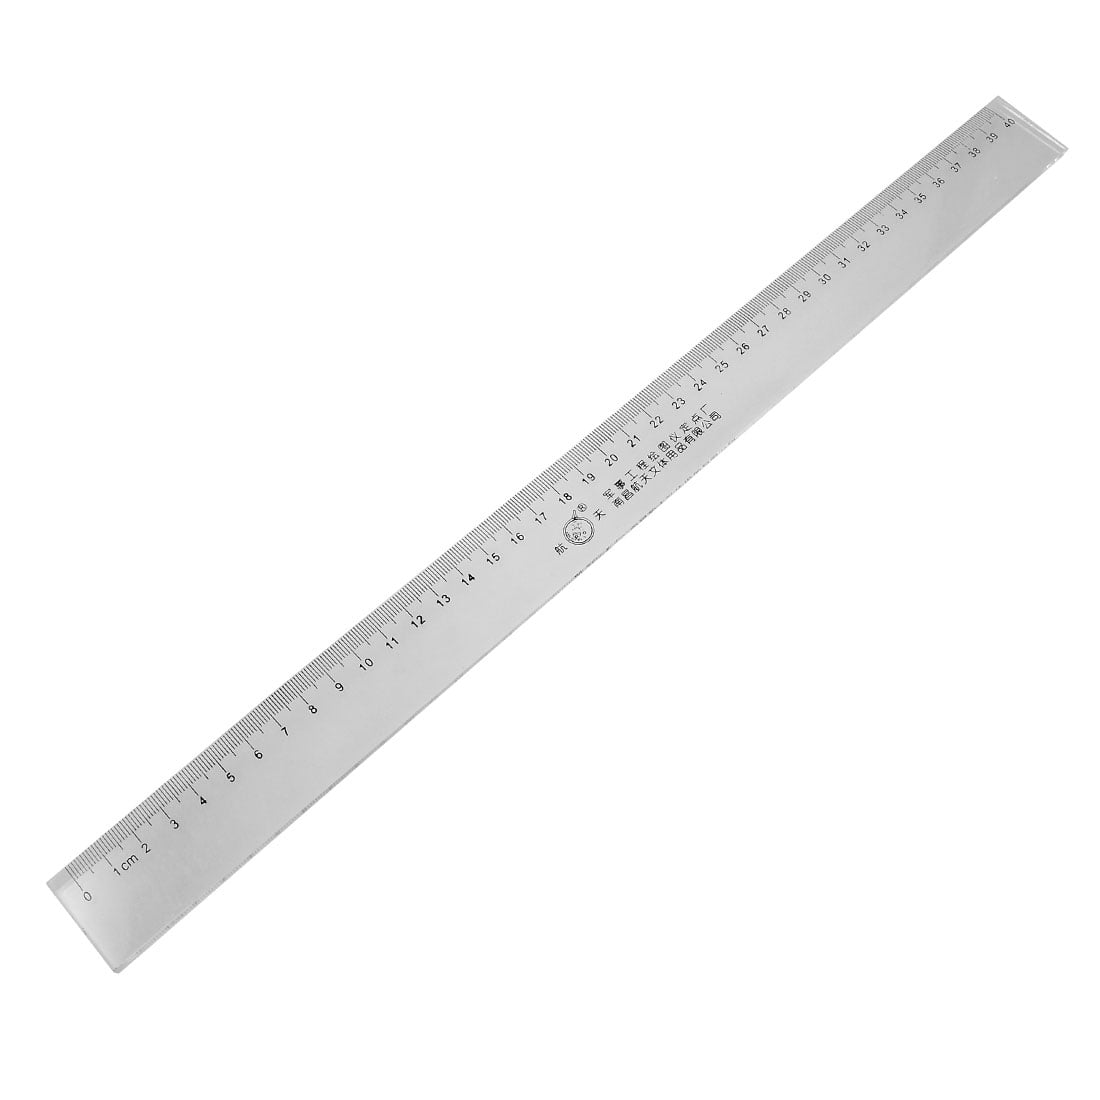 Ruler for Inches, Centimeter, and Millimeter Stock Image - Image of office,  measure: 124655097